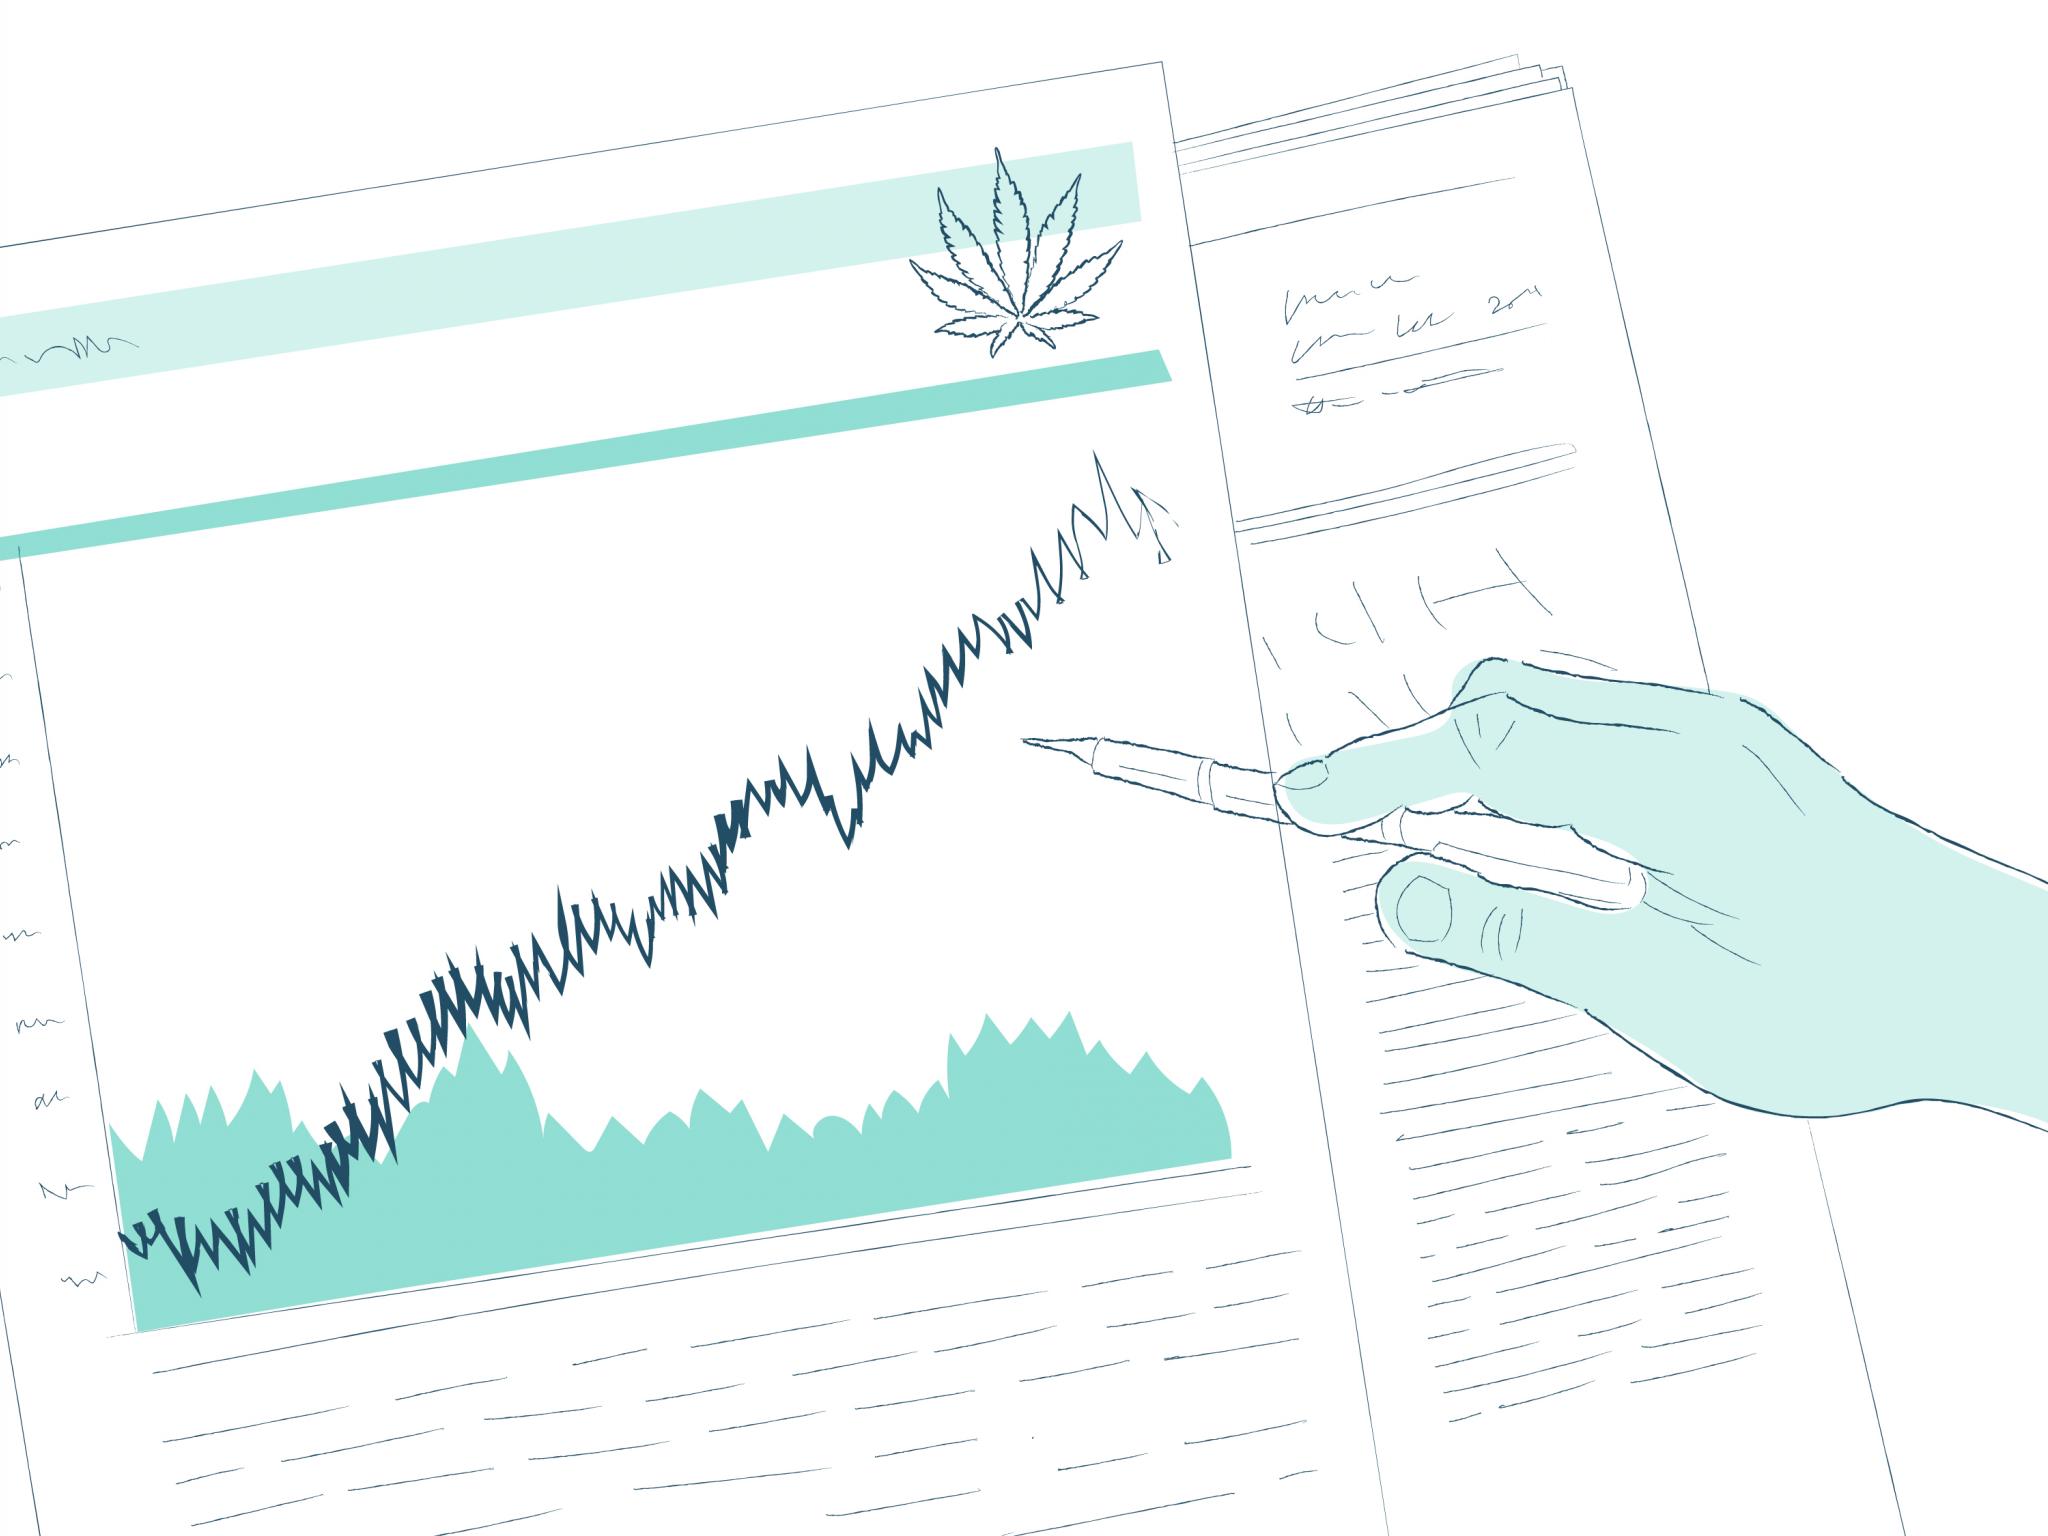  urban-gro-the-flowr-hexo--kushco-among-top-cannabis-movers-for-august-4-2021 